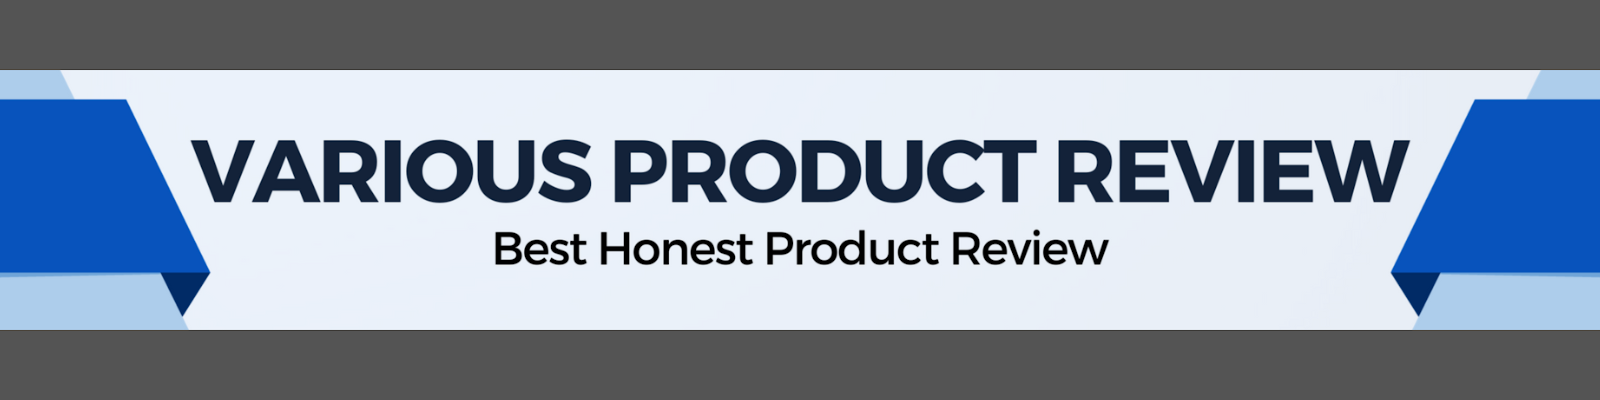 Various Product Review